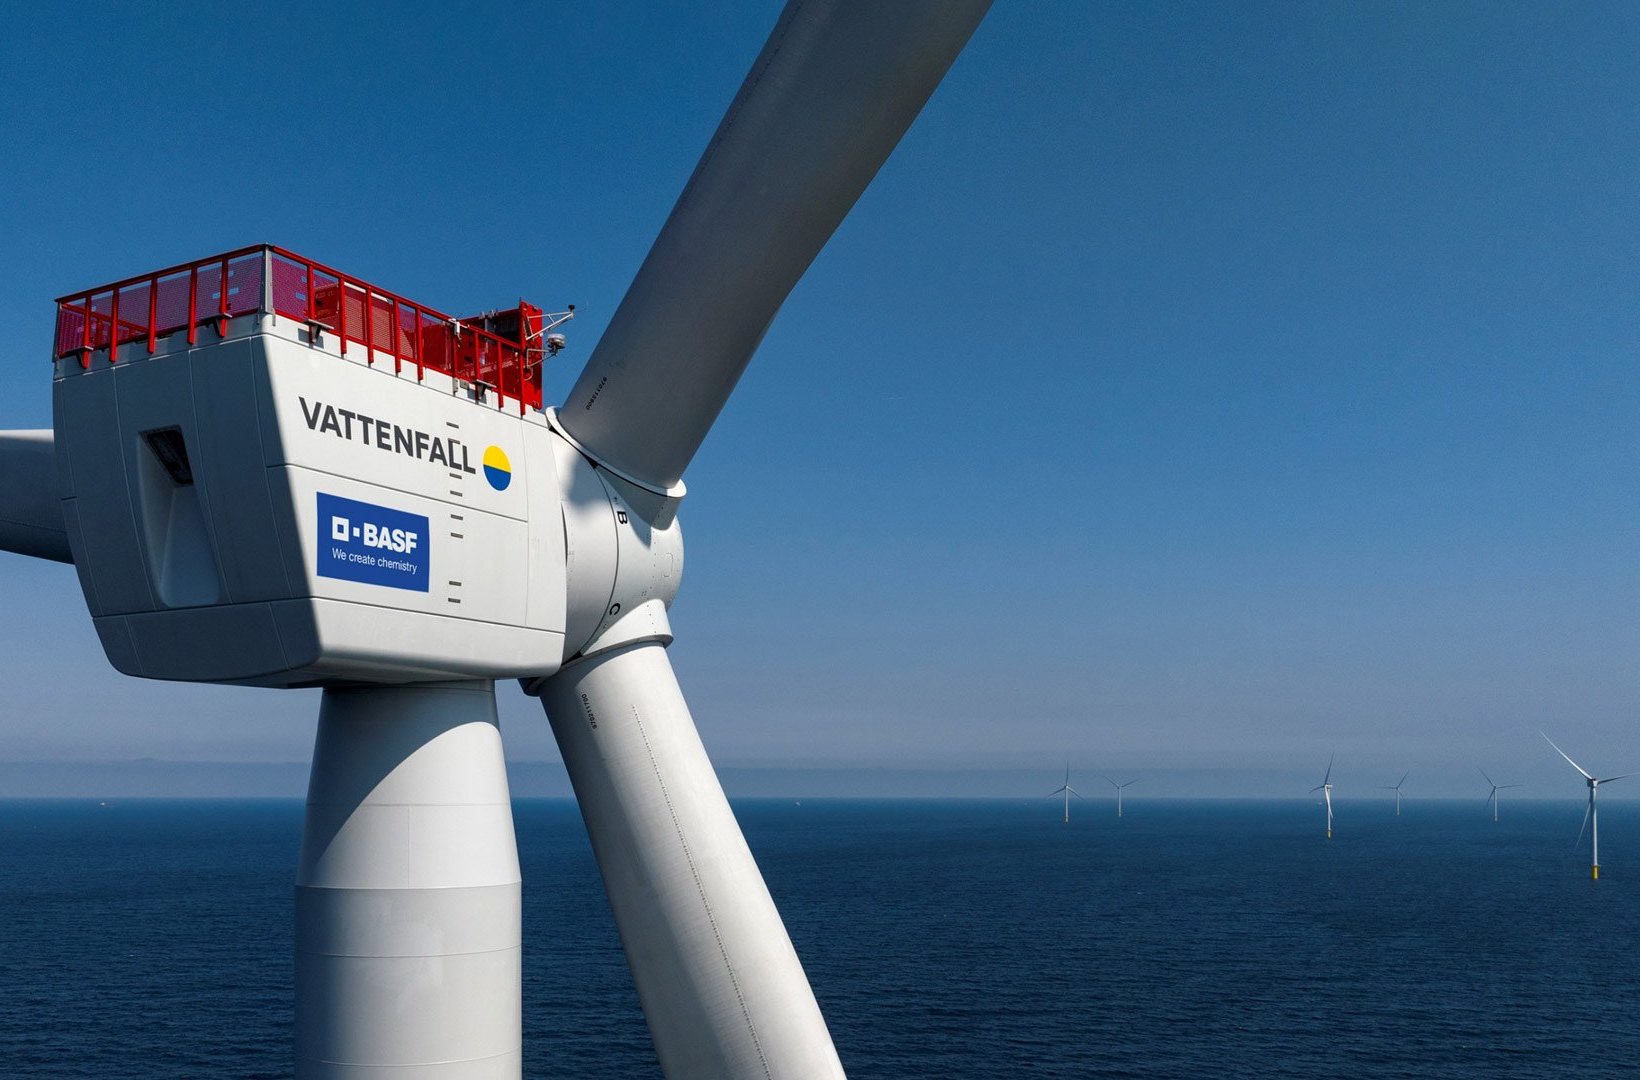 Offshore wind farm with BASF and Vattenfall logos